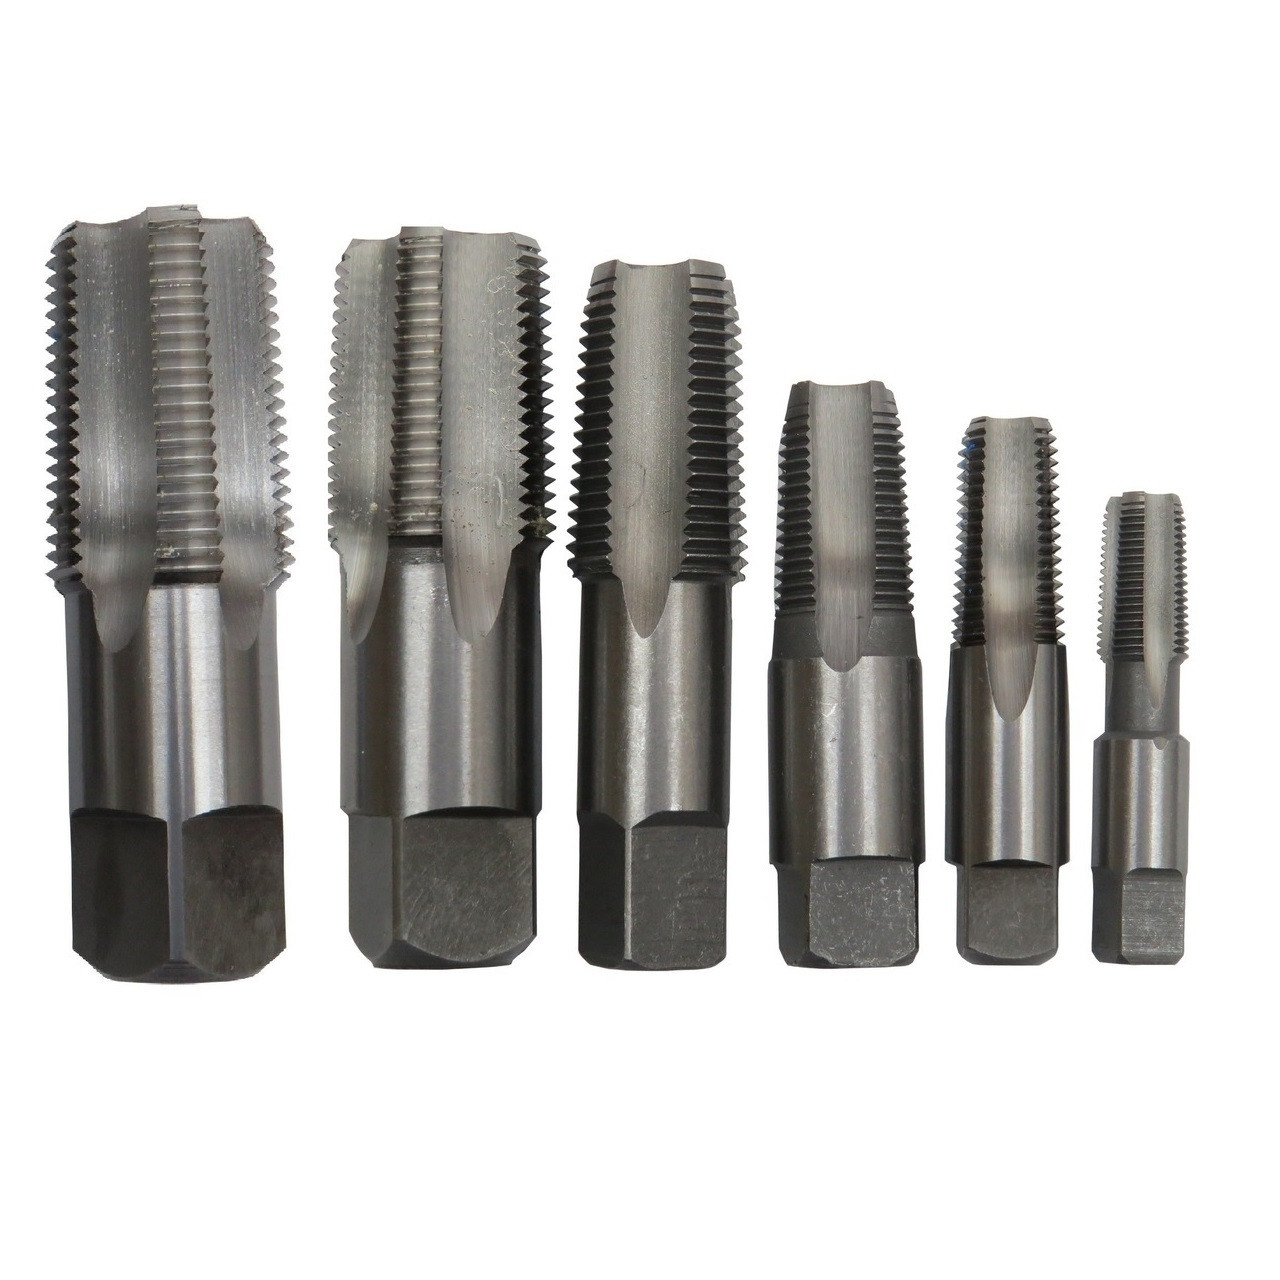 14 NPT Taper Pipe Tap Cleaning Rethreading Carbon Steel High Quality 1/2" 